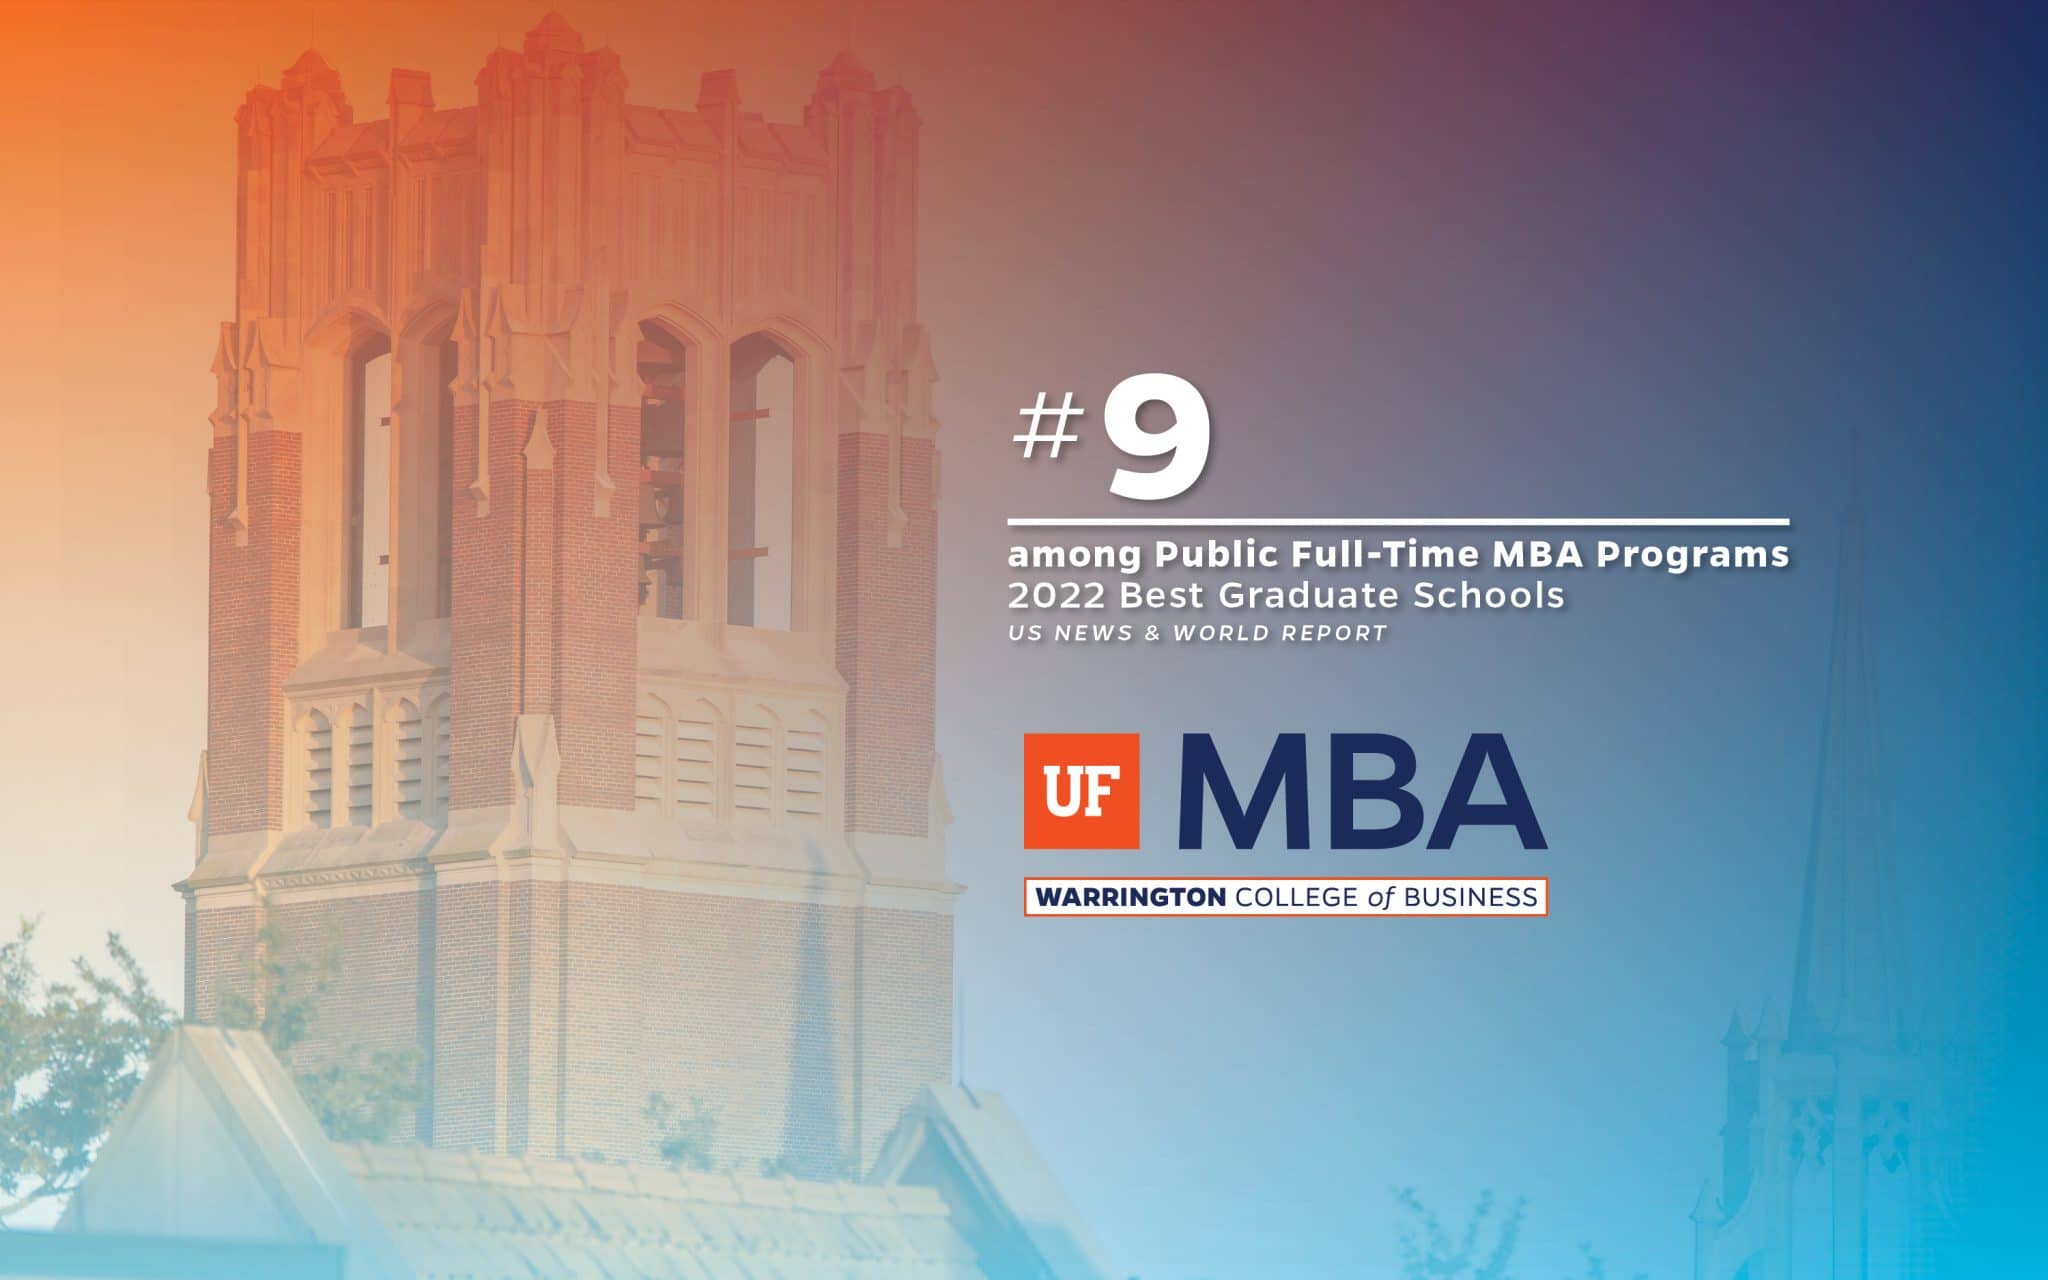 Strong performance for UF MBA in latest US News ranking, despite